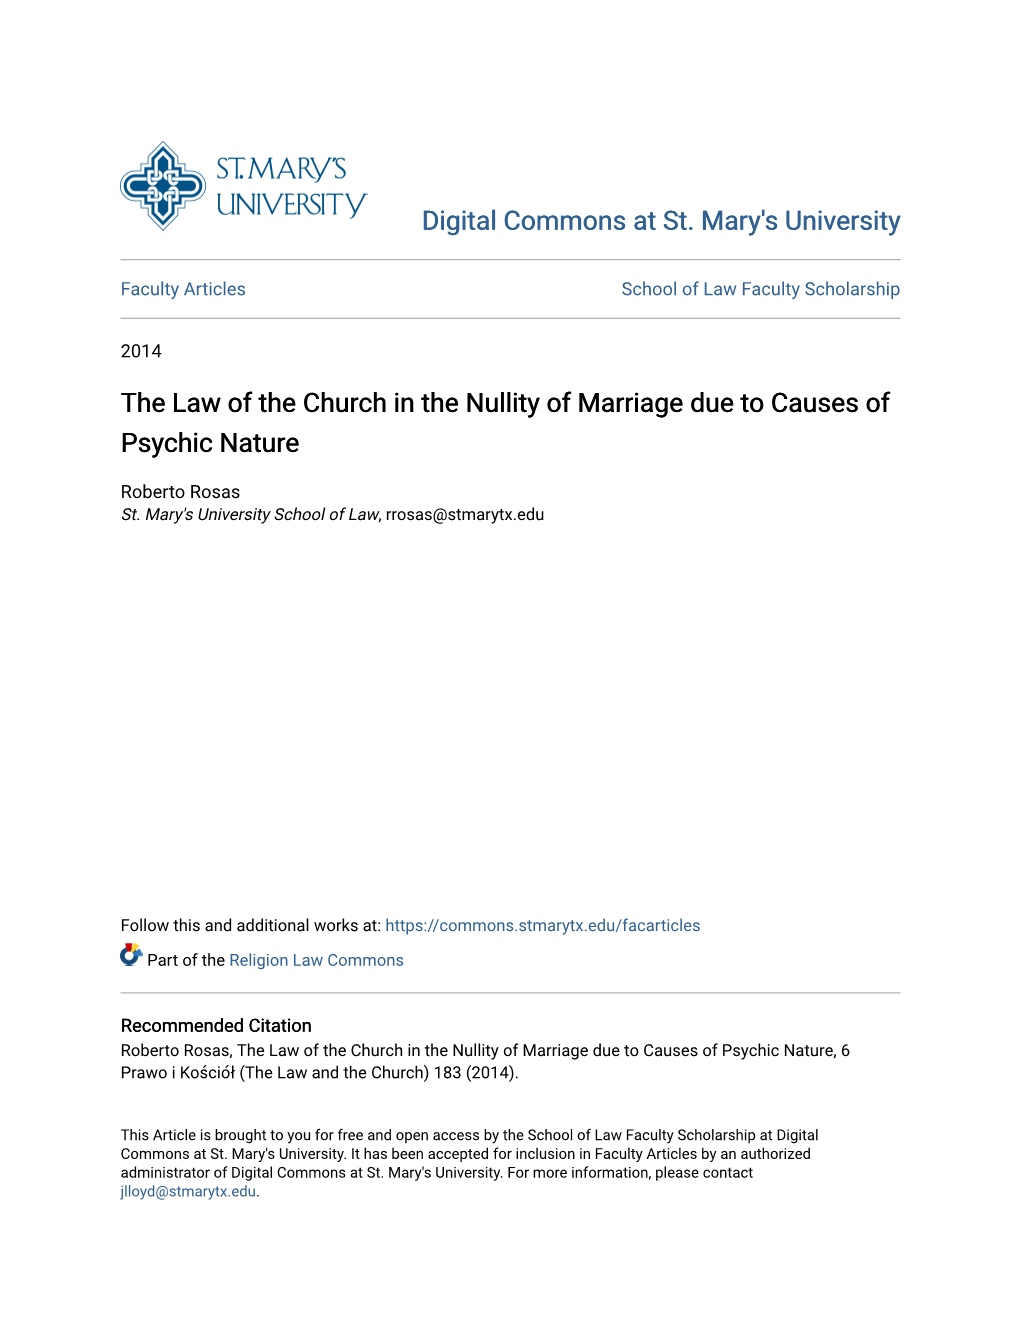 The Law of the Church in the Nullity of Marriage Due to Causes of Psychic Nature